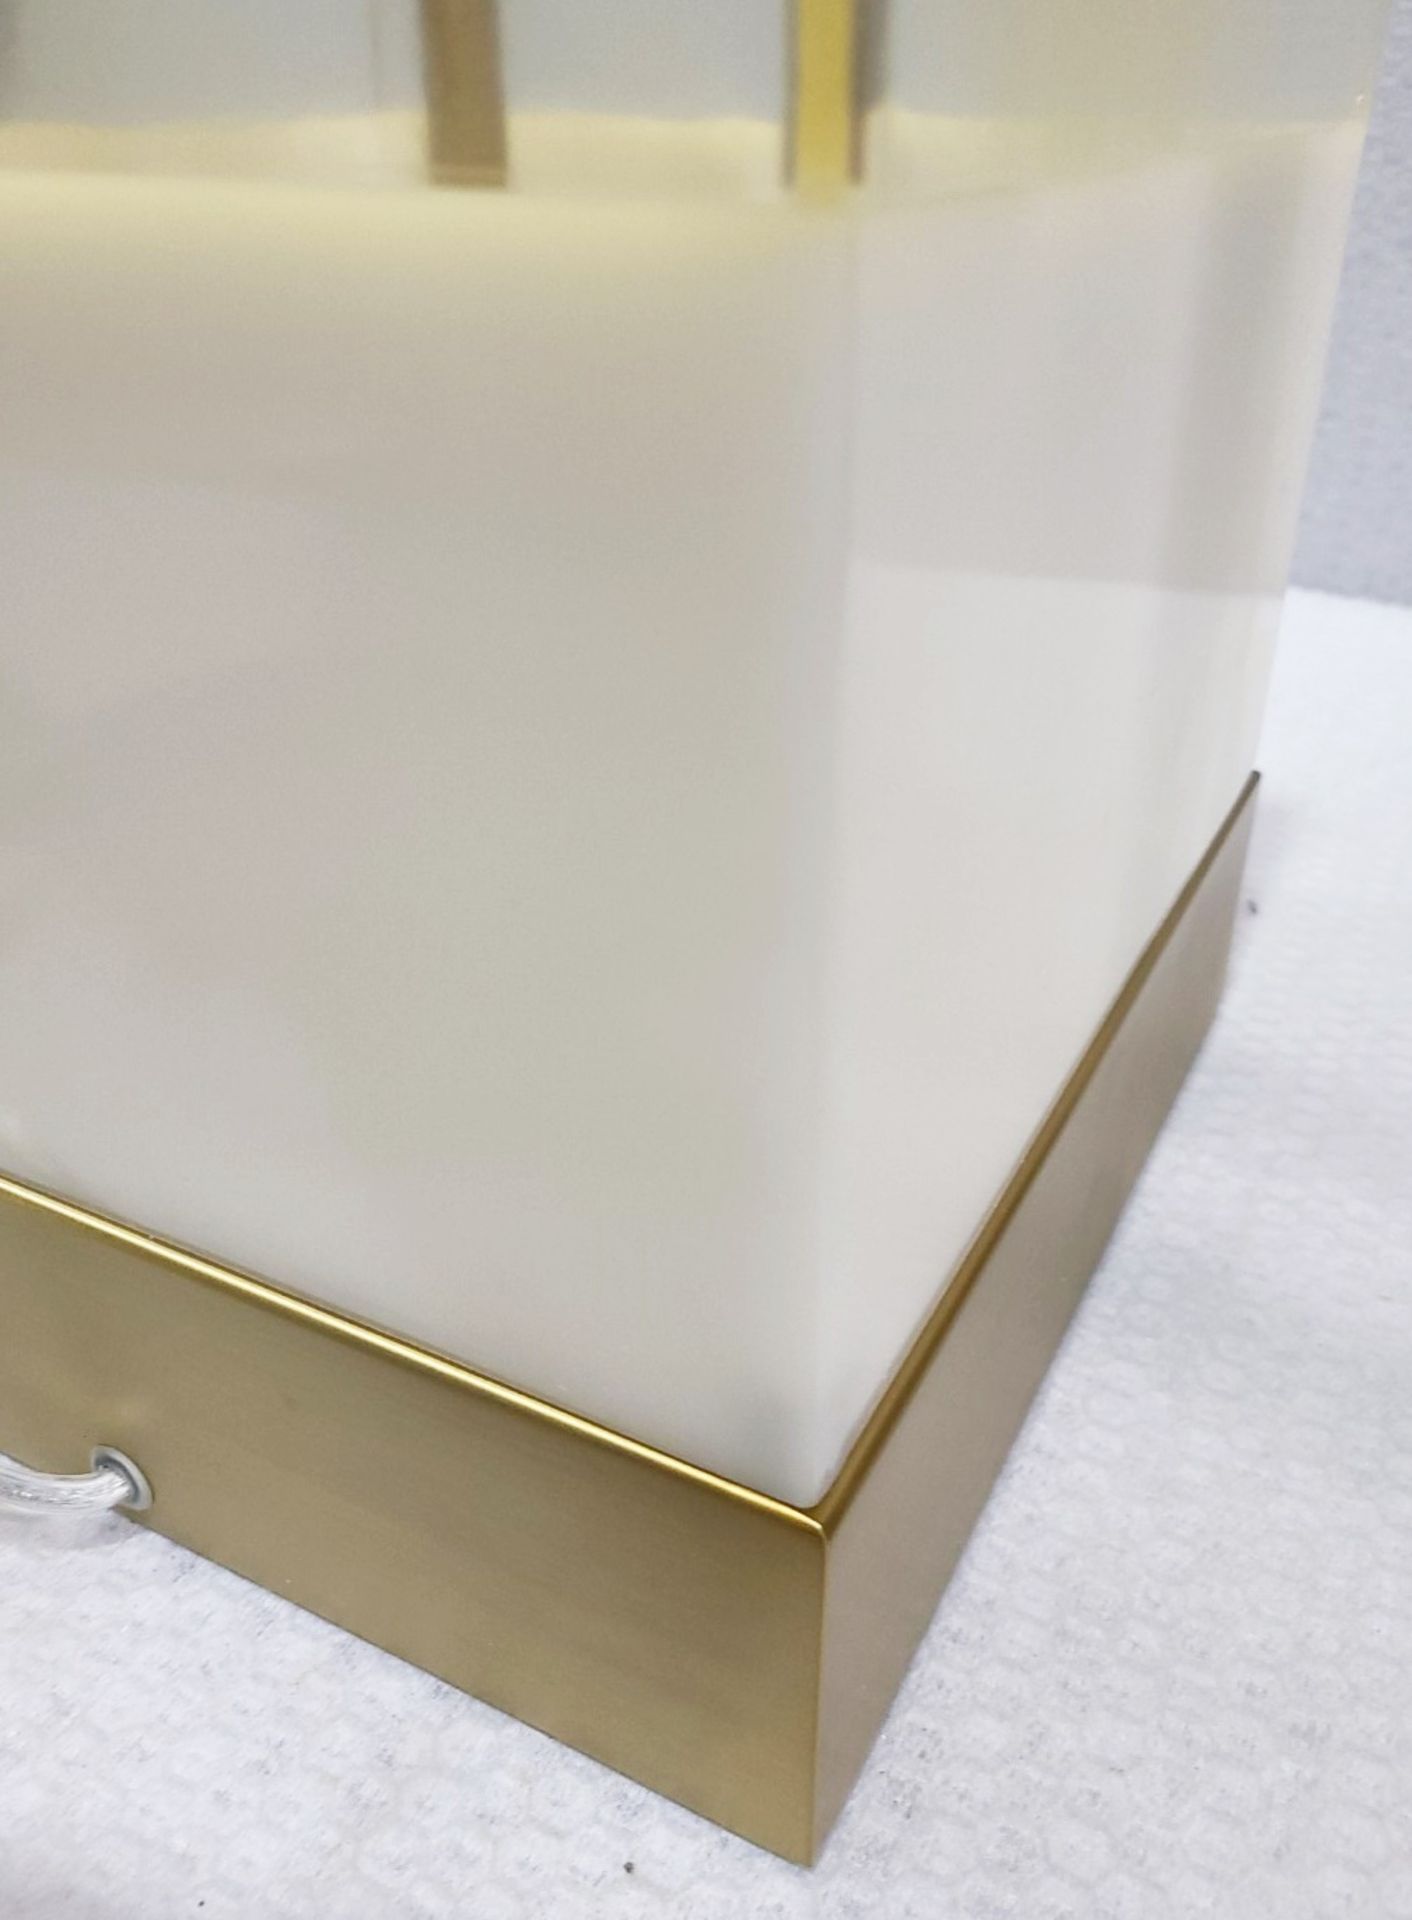 1 x CHELSOM Rectangular Gold Tinted Glass Box Table Lamp With Stone Lower Third And Brass Base - Image 10 of 10